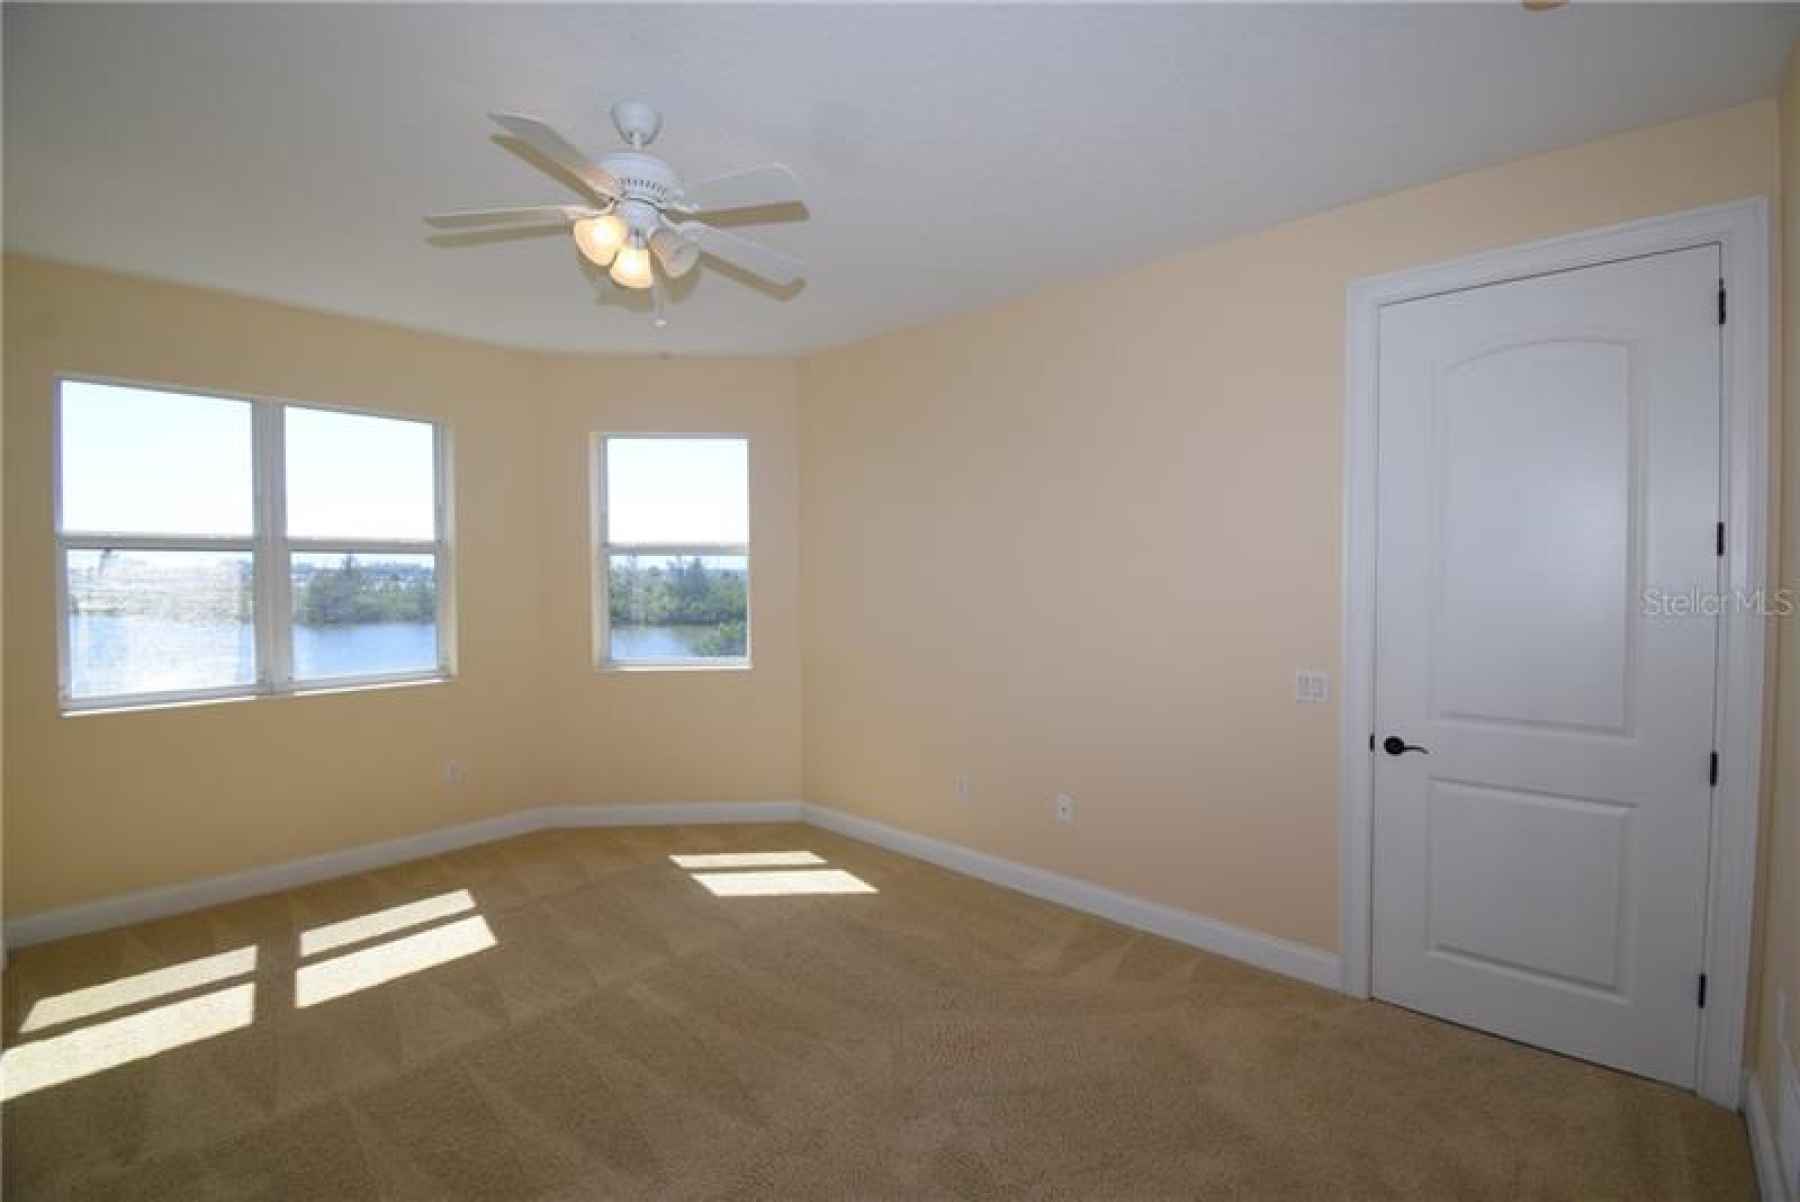 Master bedroom with views of the Manatee River.